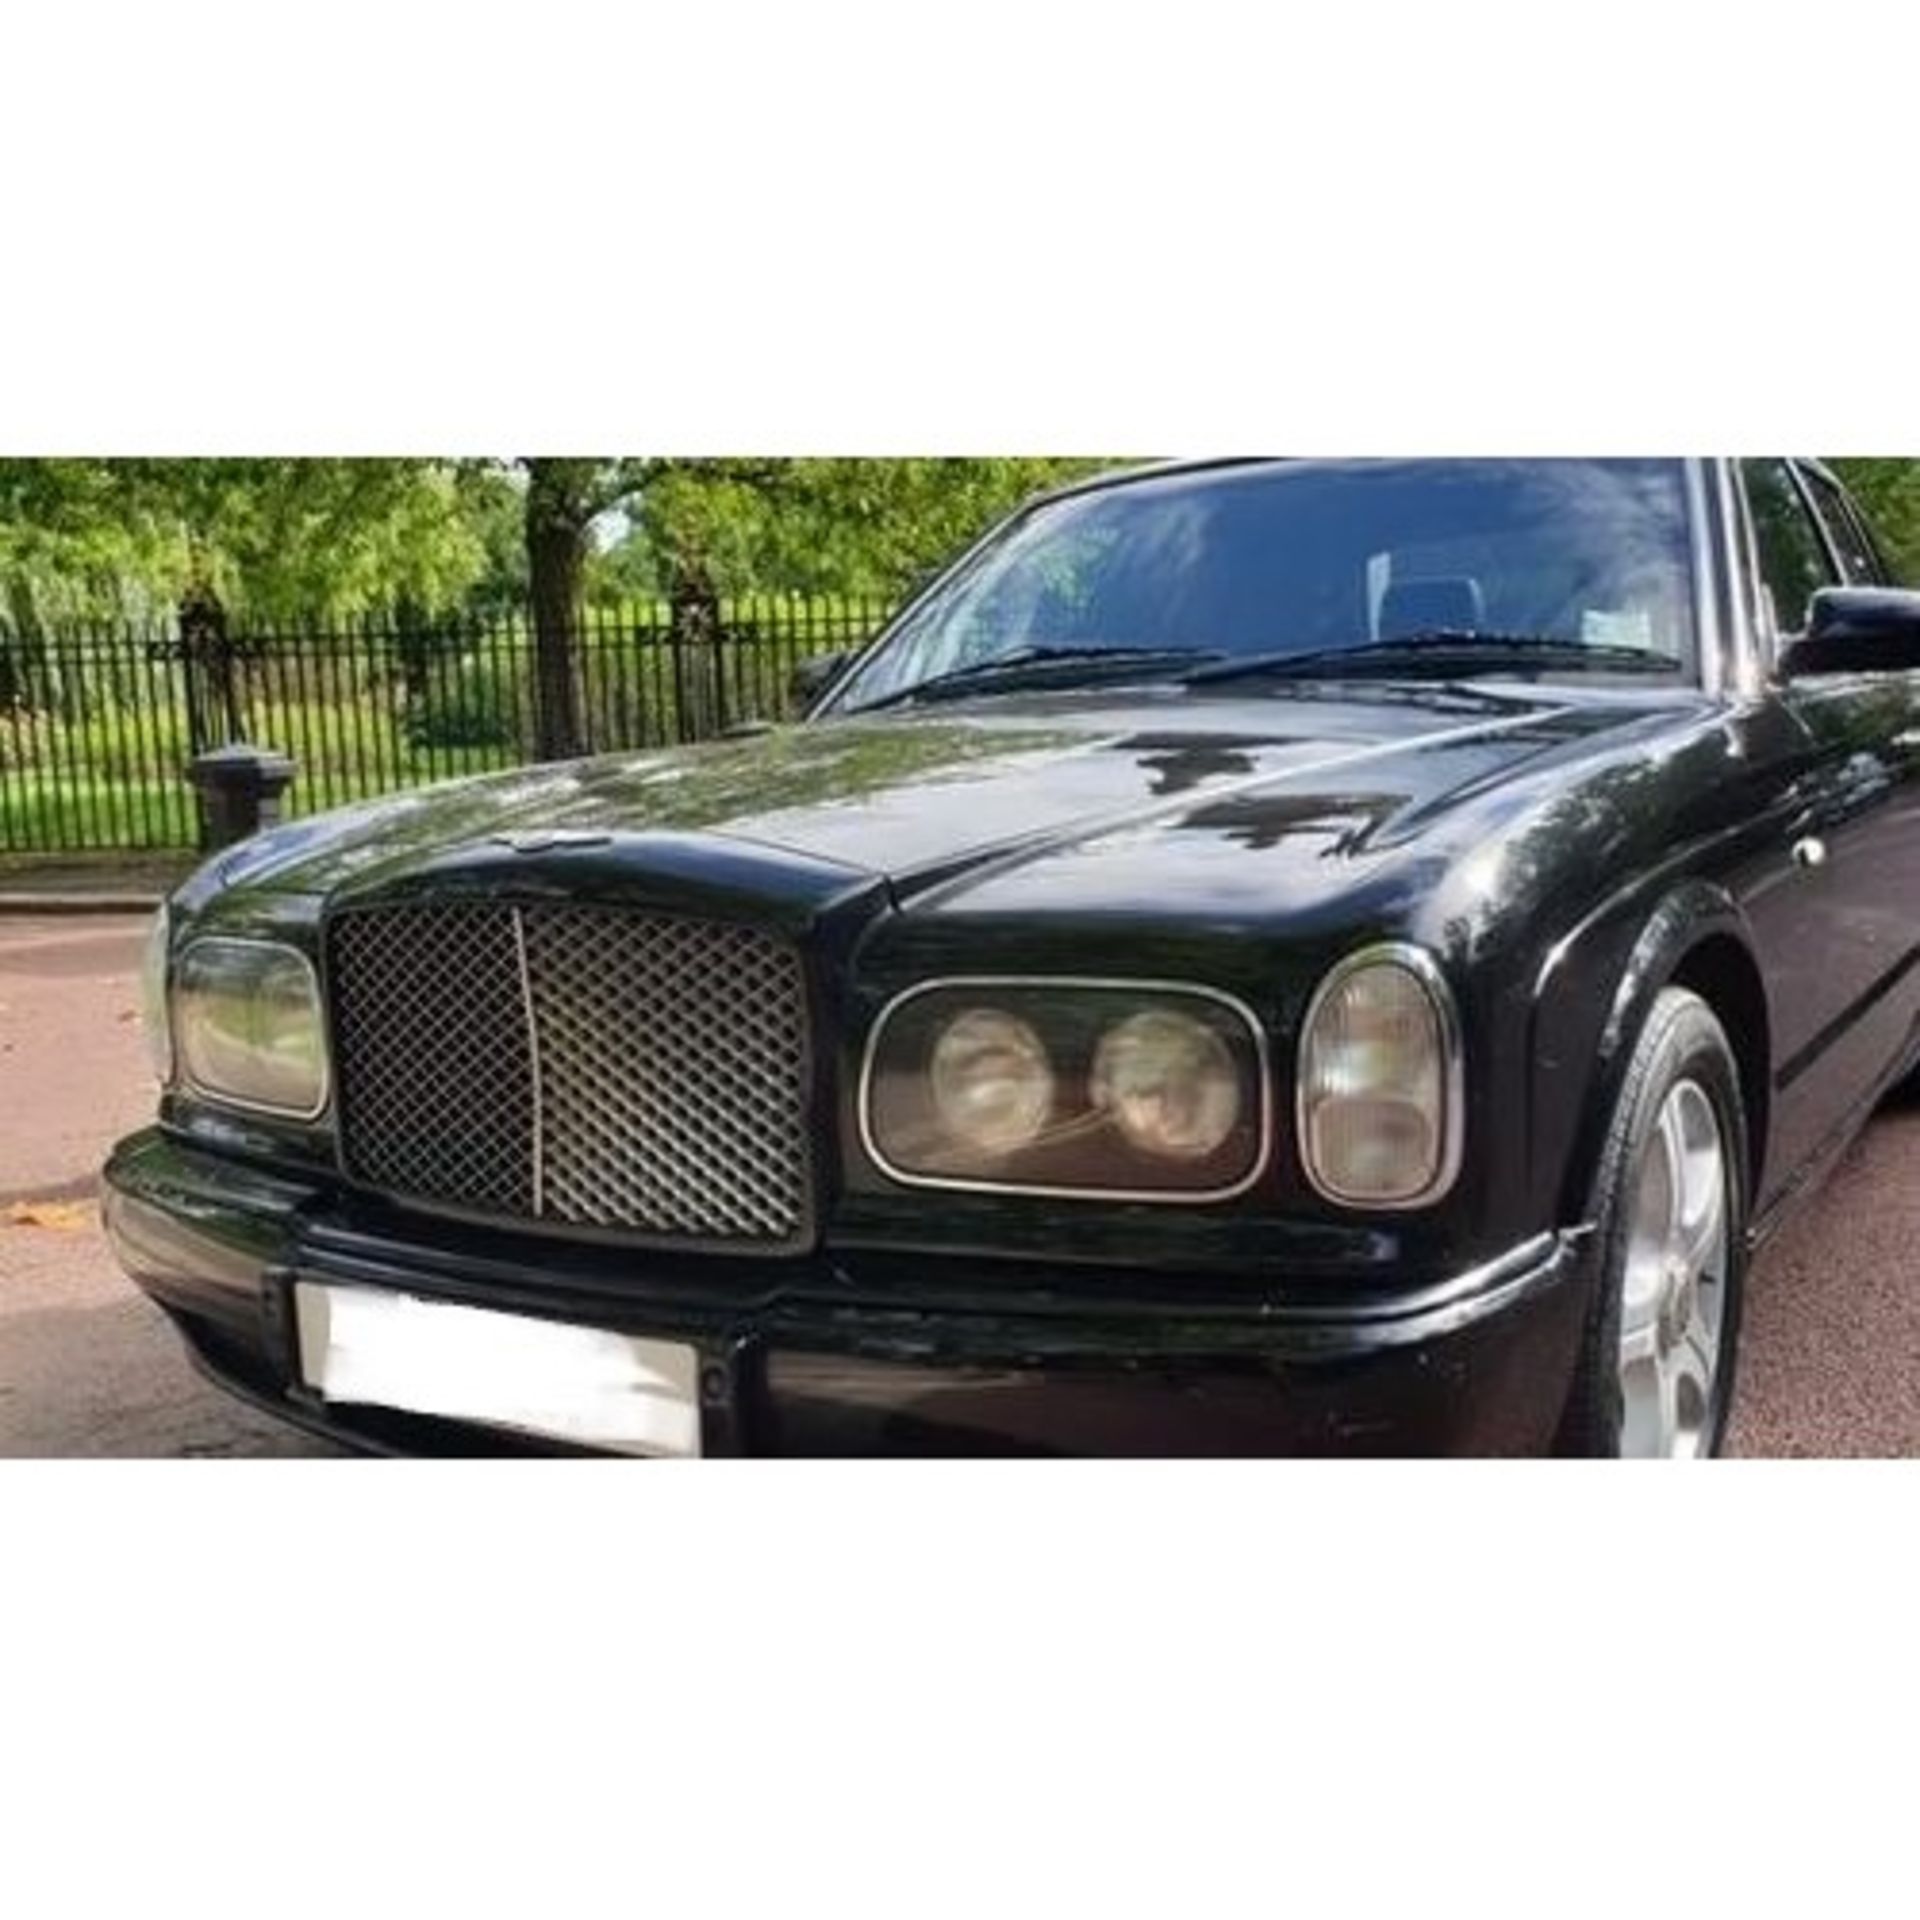 CELEBRATE THE CORONATION WITH A BENTLEY ARNAGE – FIT FOR A KING Bentley Arnage R, 6750cc V8 - Image 3 of 17